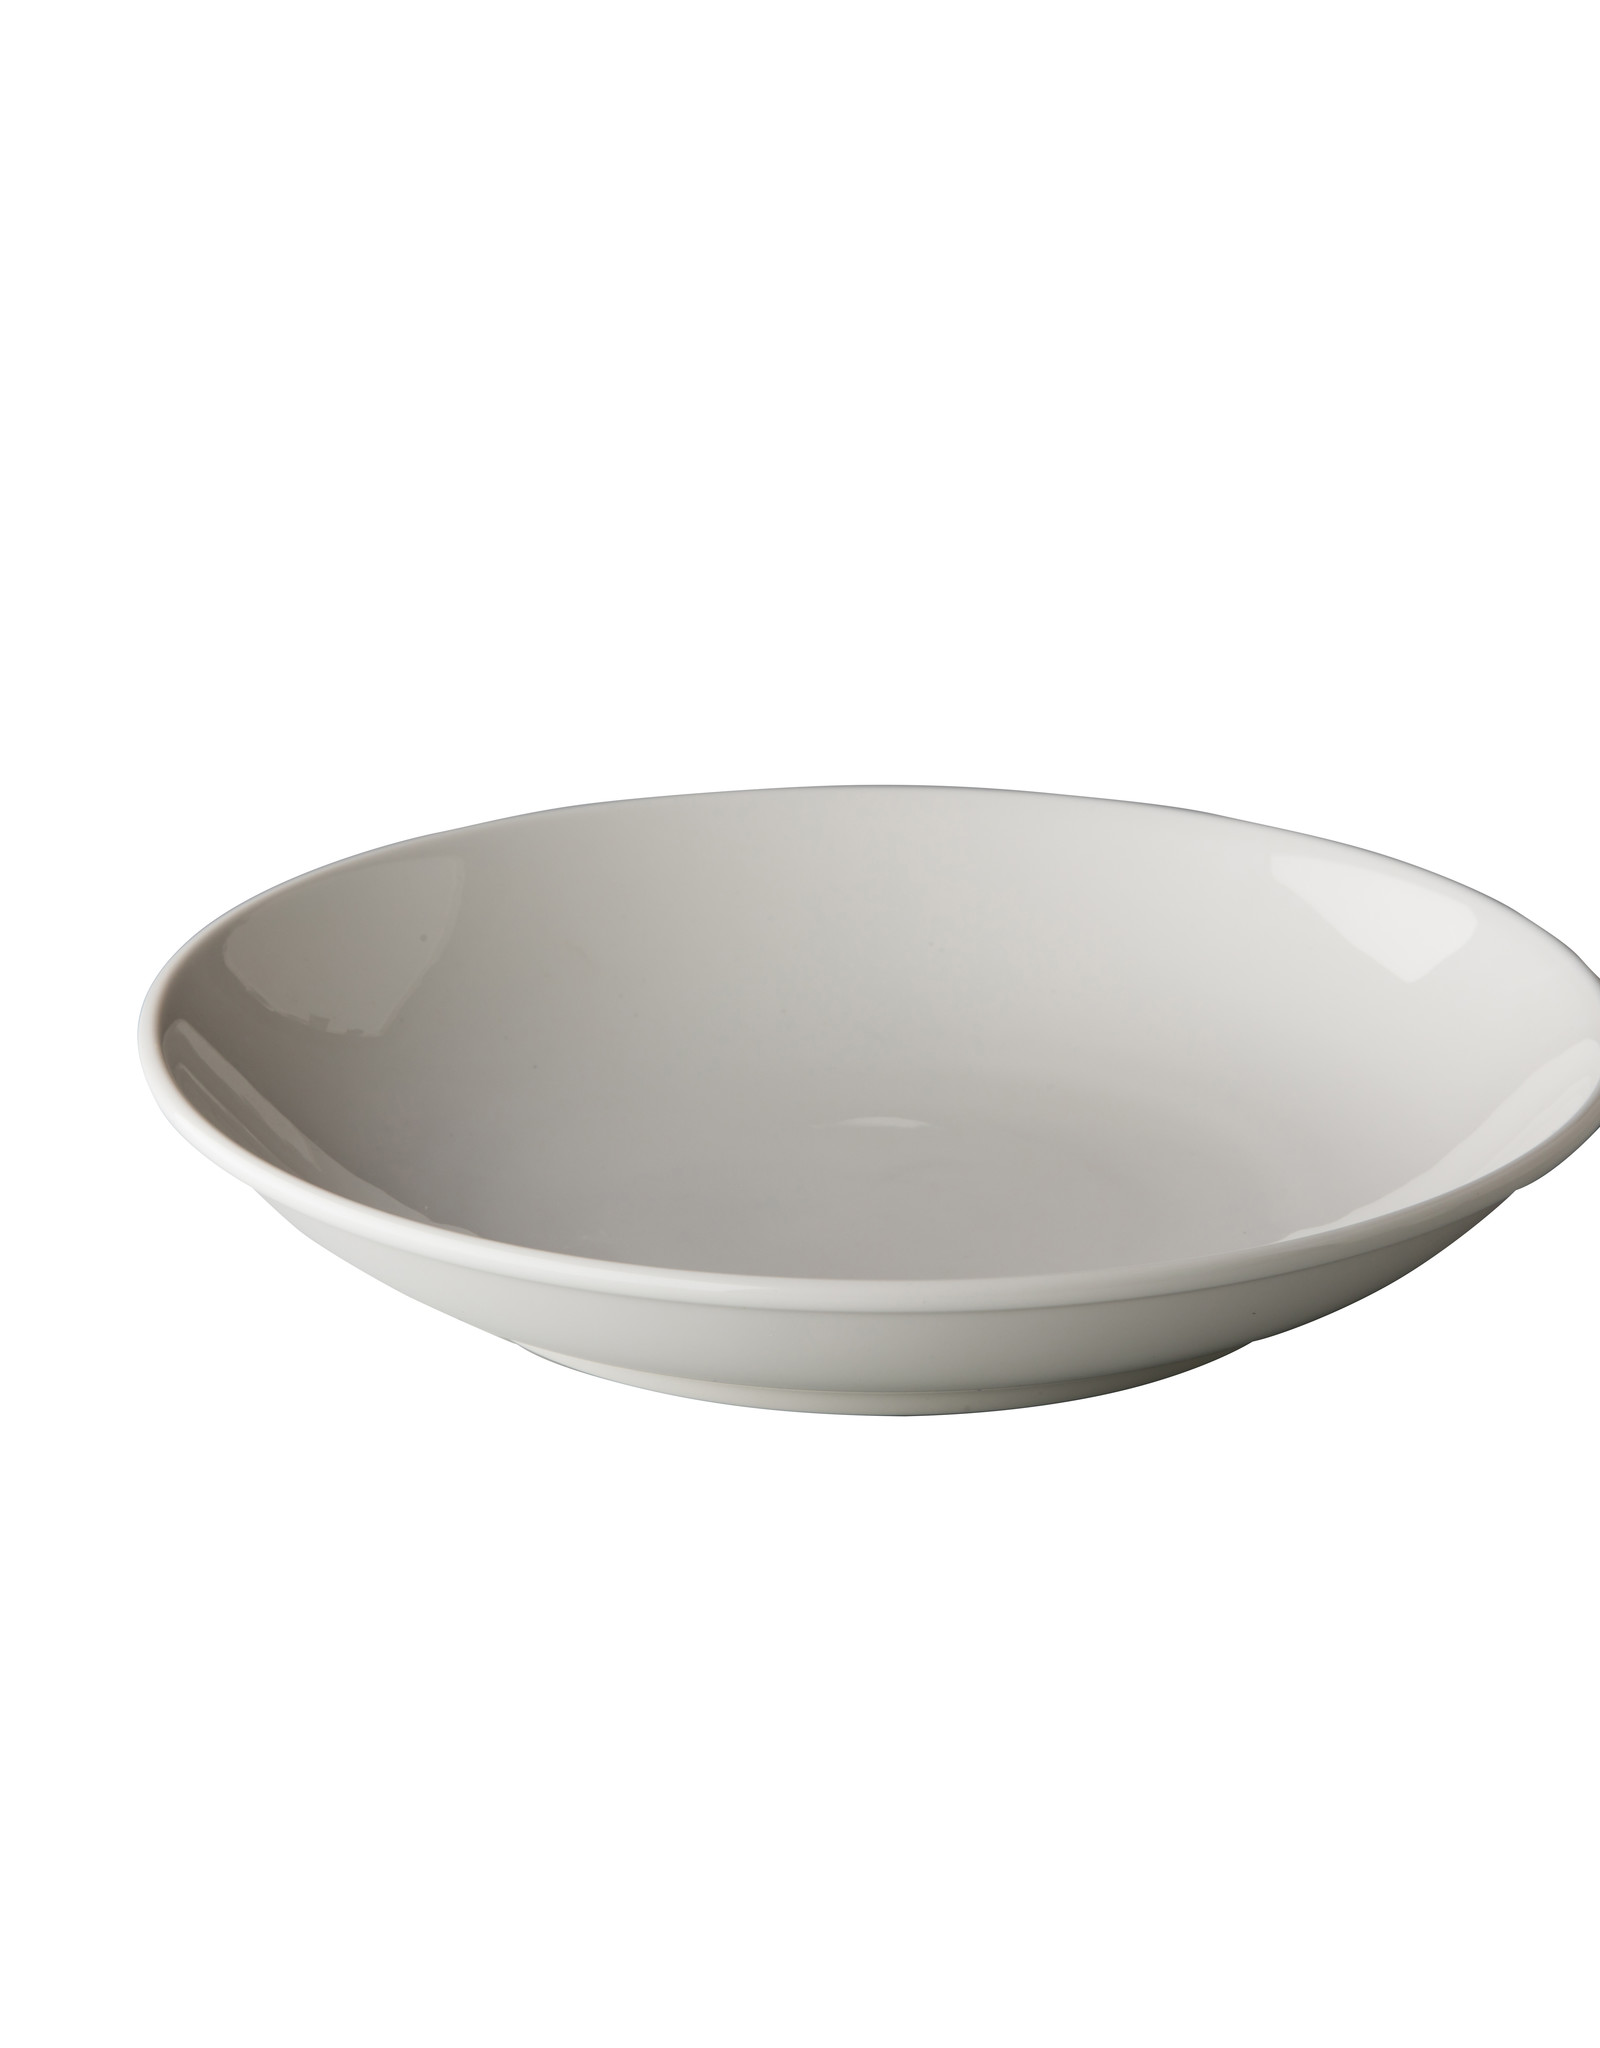 Stylepoint Q Fine China coupe plate deep 26 cm